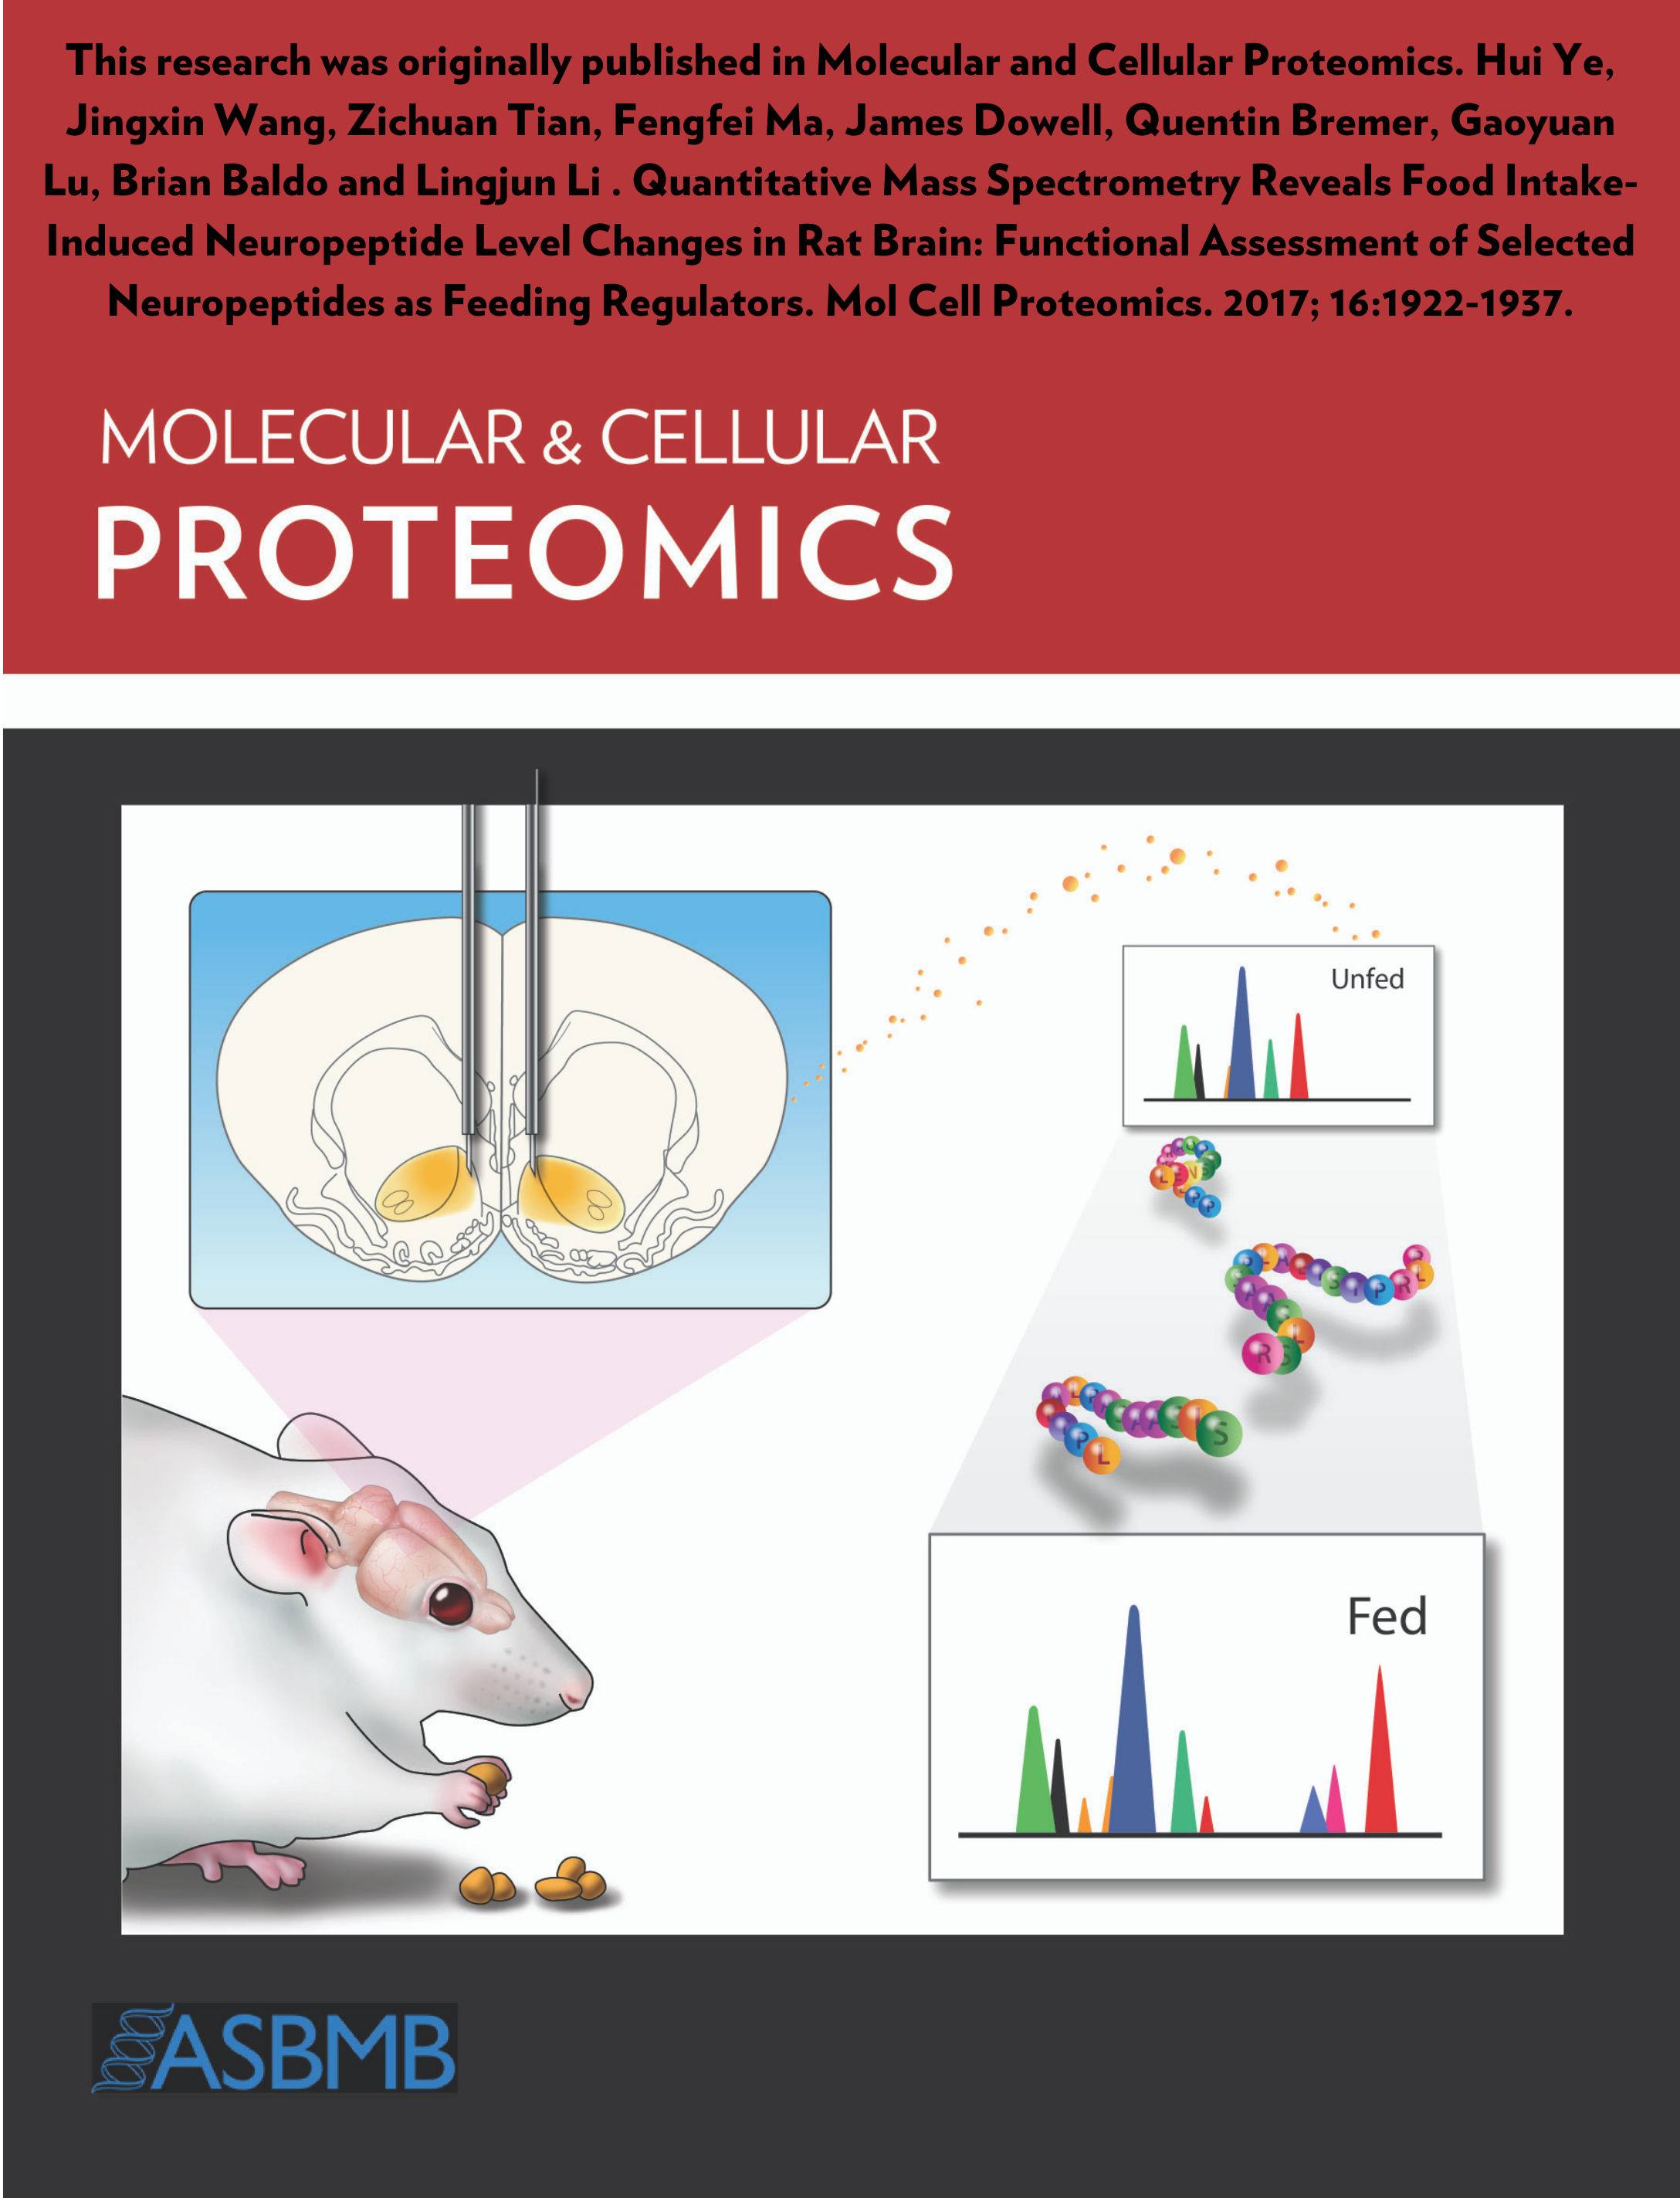 ASBMB Research cover on Molecular & Cellular Proteomics